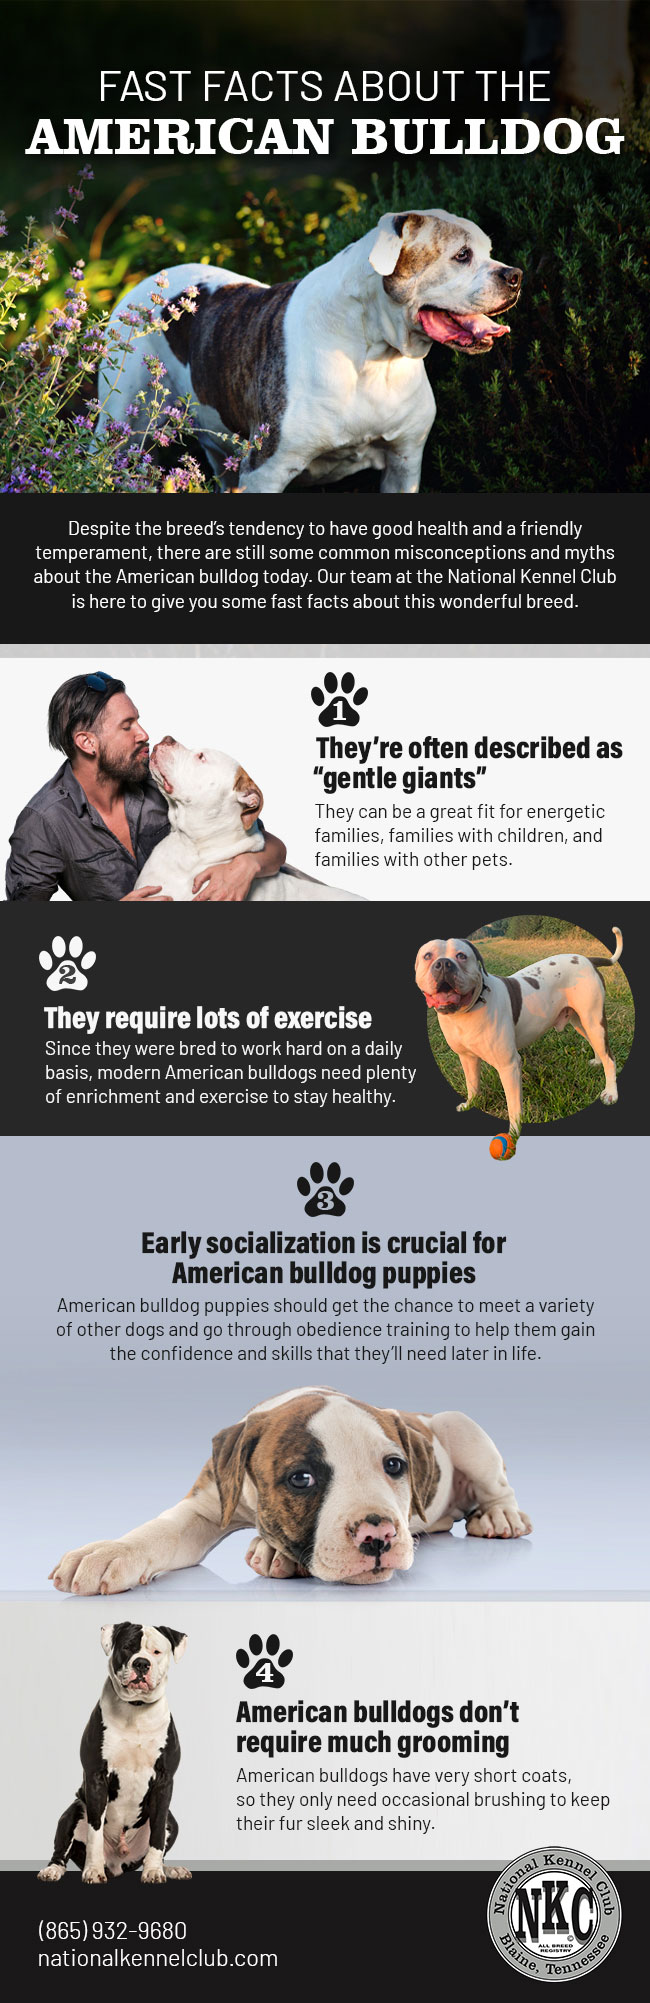 Fast Facts About the American Bulldog